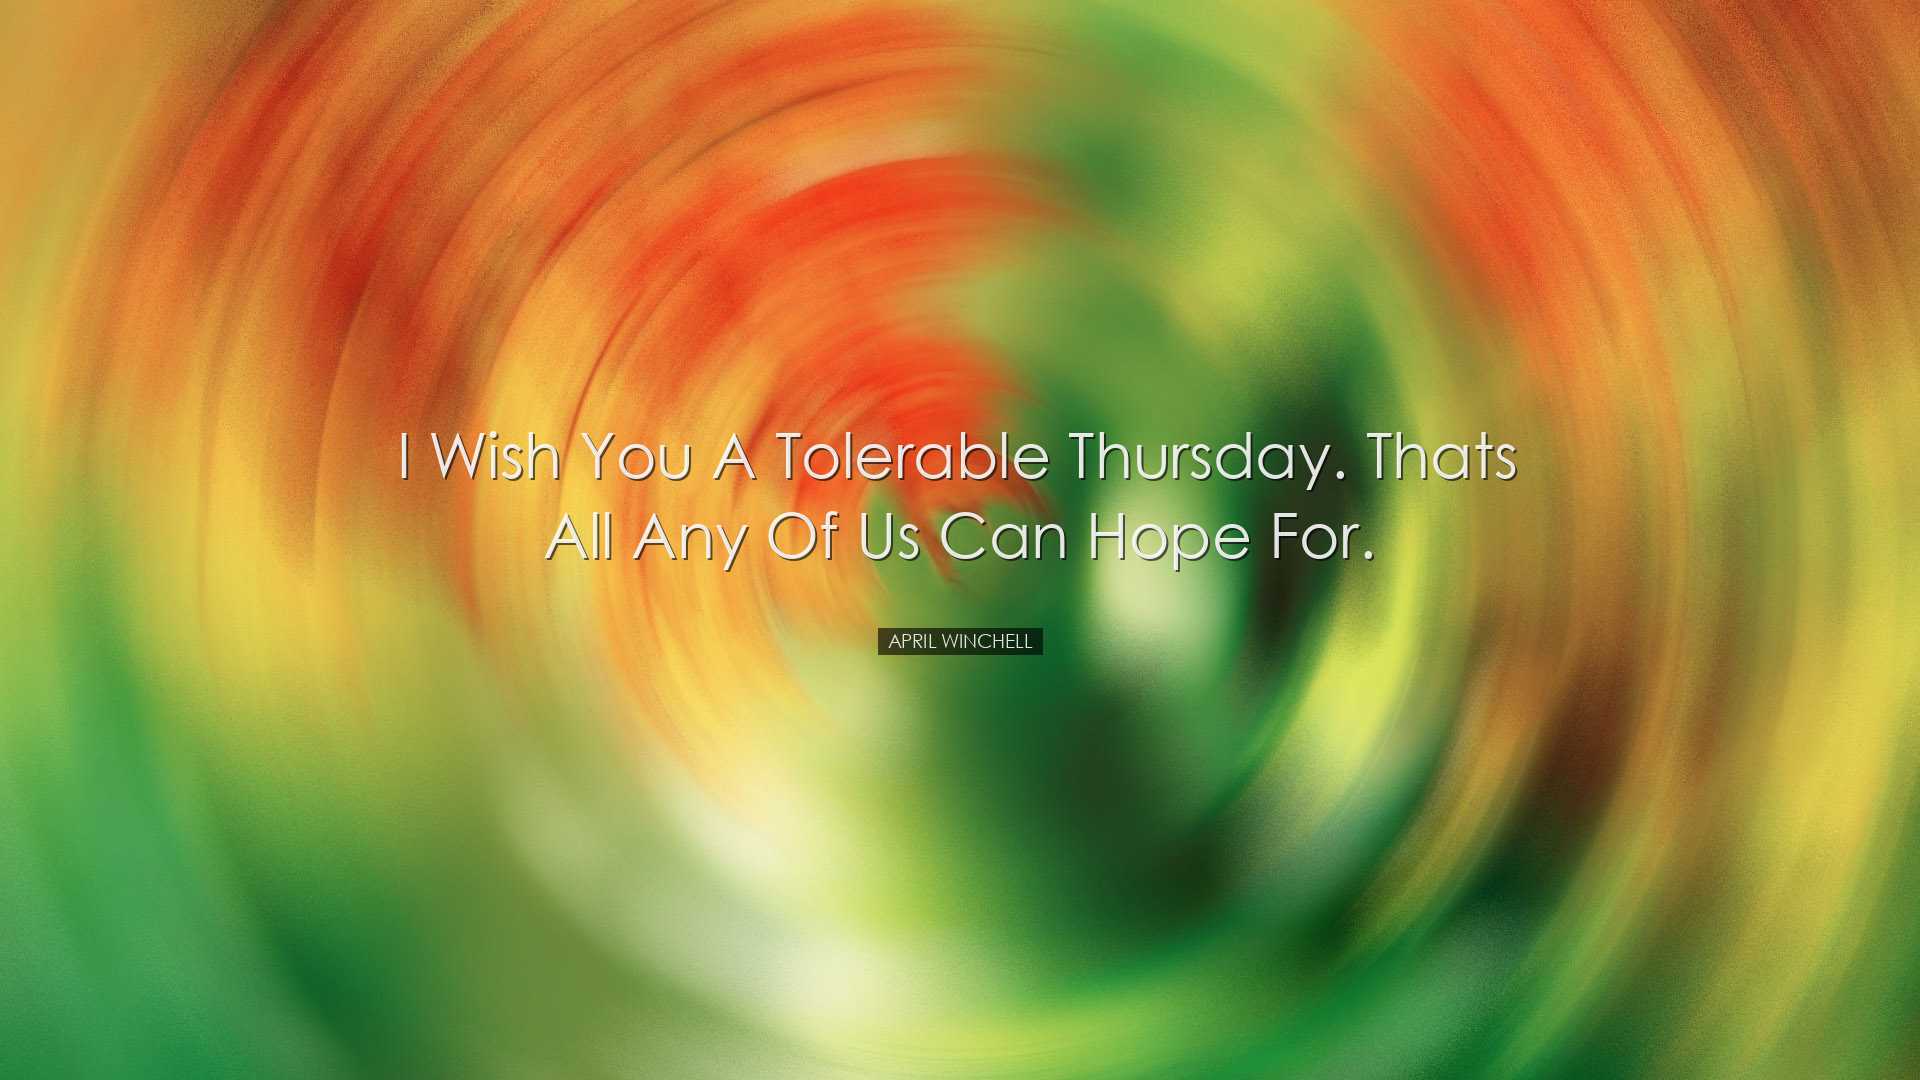 I wish you a tolerable Thursday. Thats all any of us can hope for.